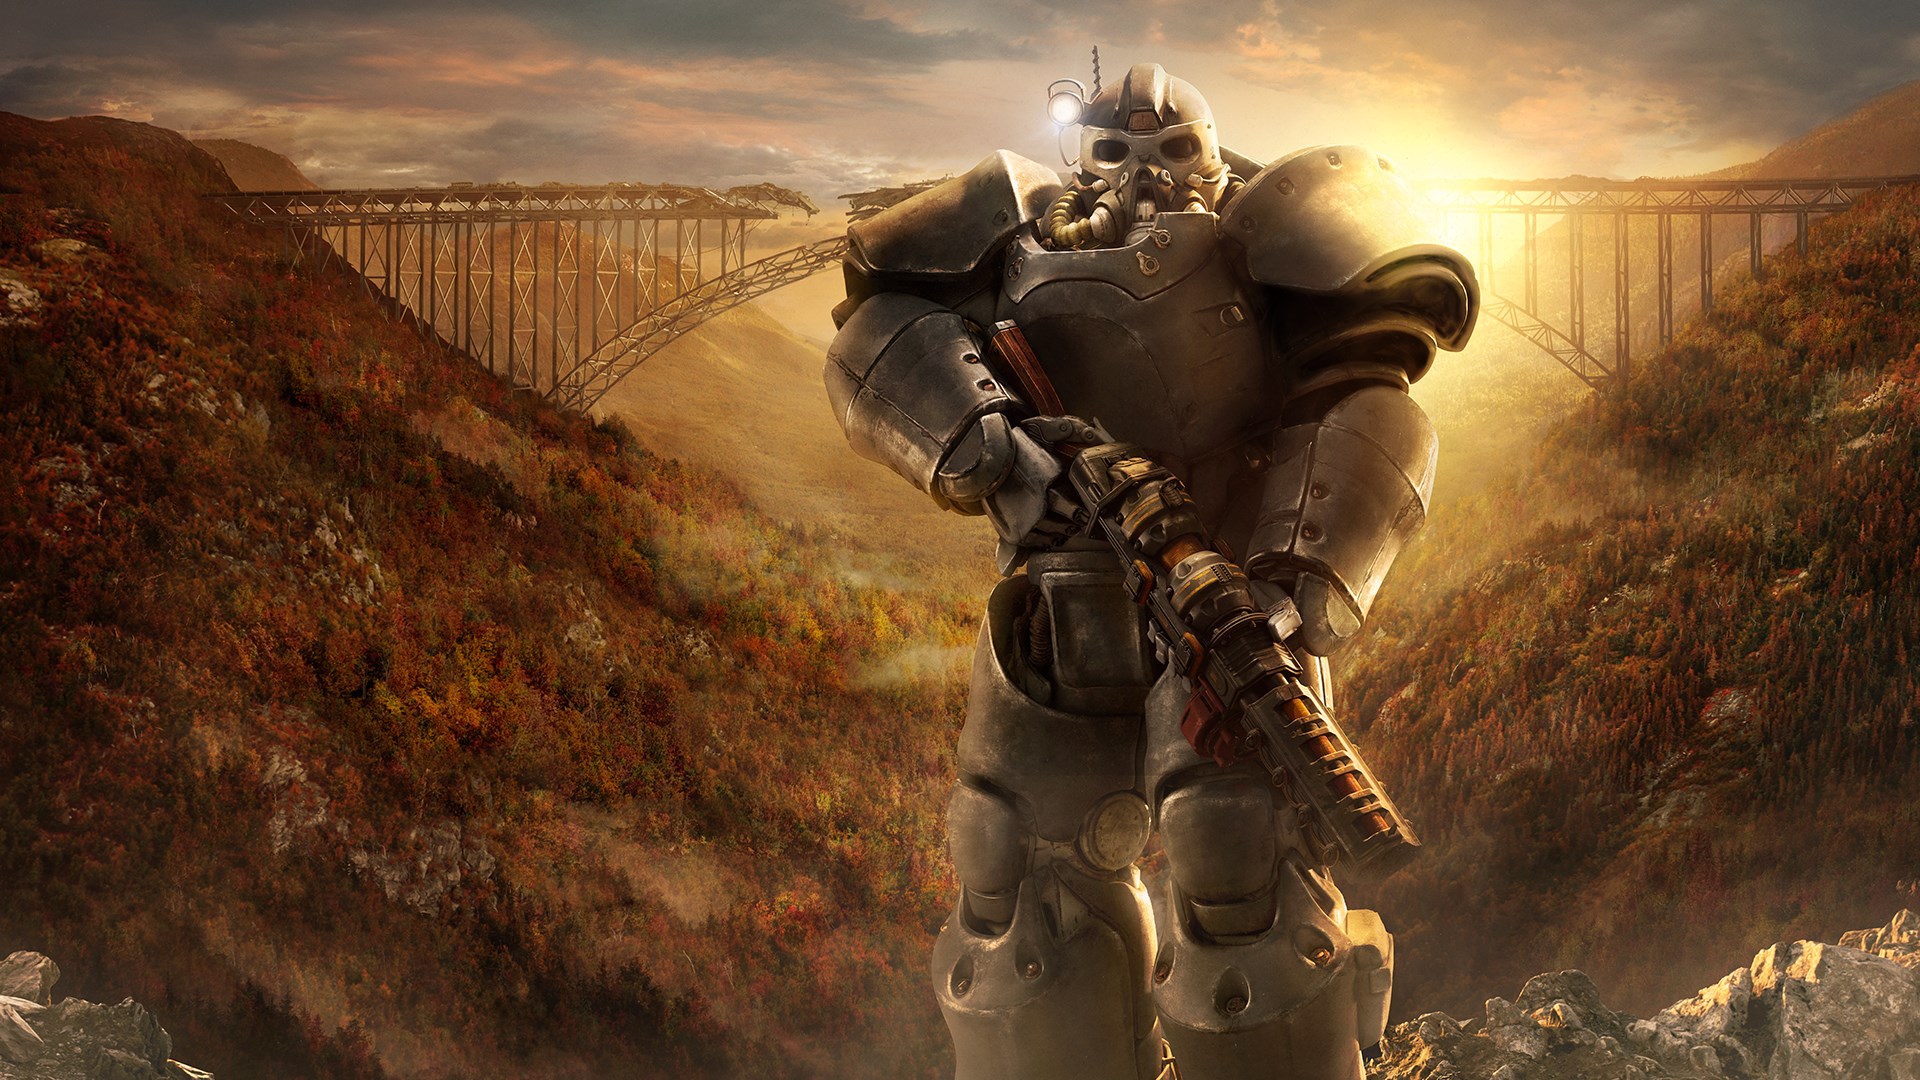 fallout 1 for mac free download